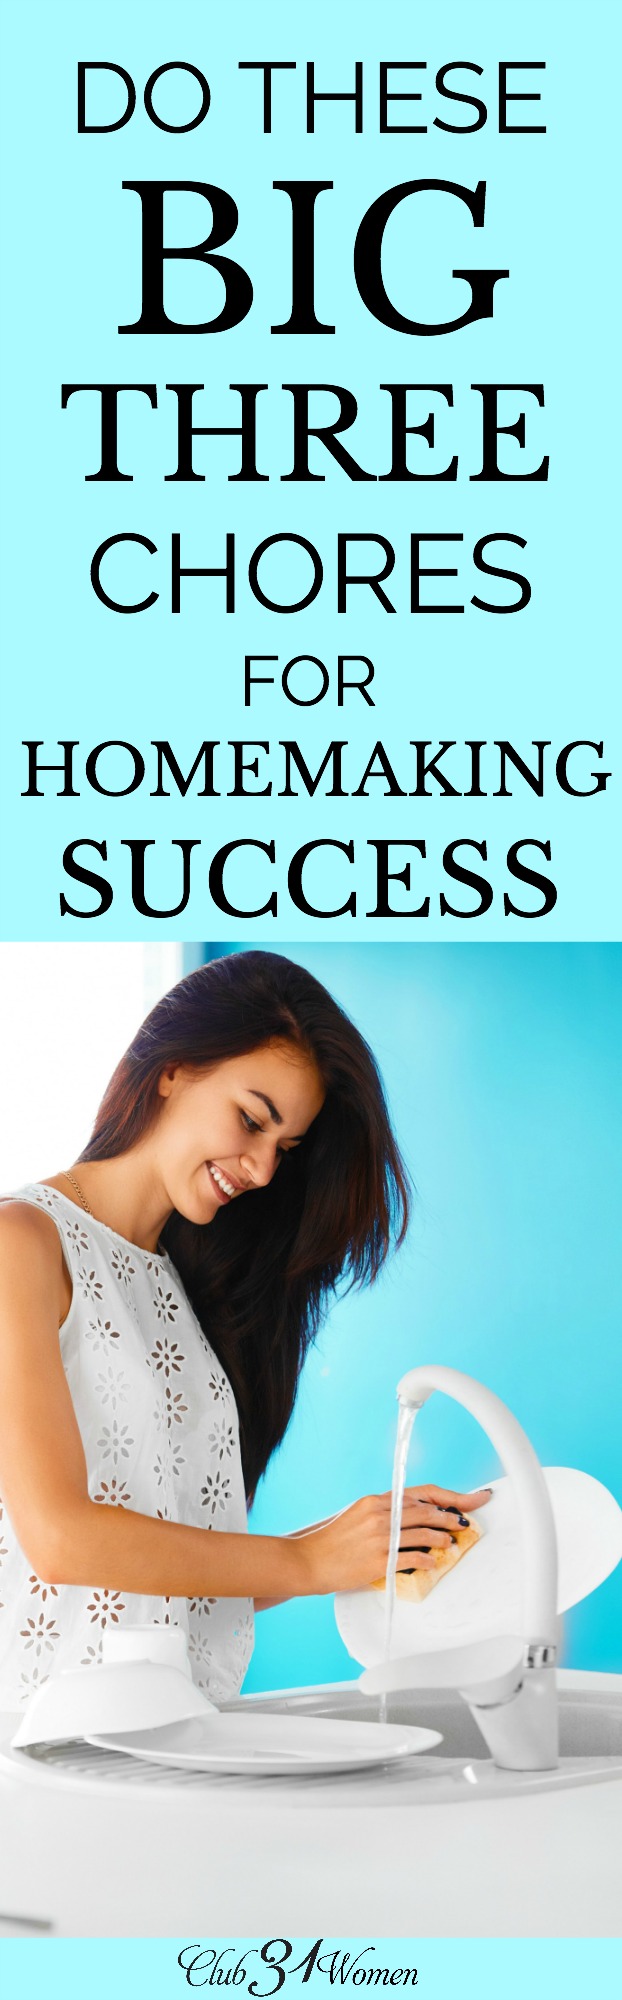 To keep a successful homemaking routine and have ongoing peace in your home, start with these 3 chores first before managing the smaller tasks.  via @Club31Women